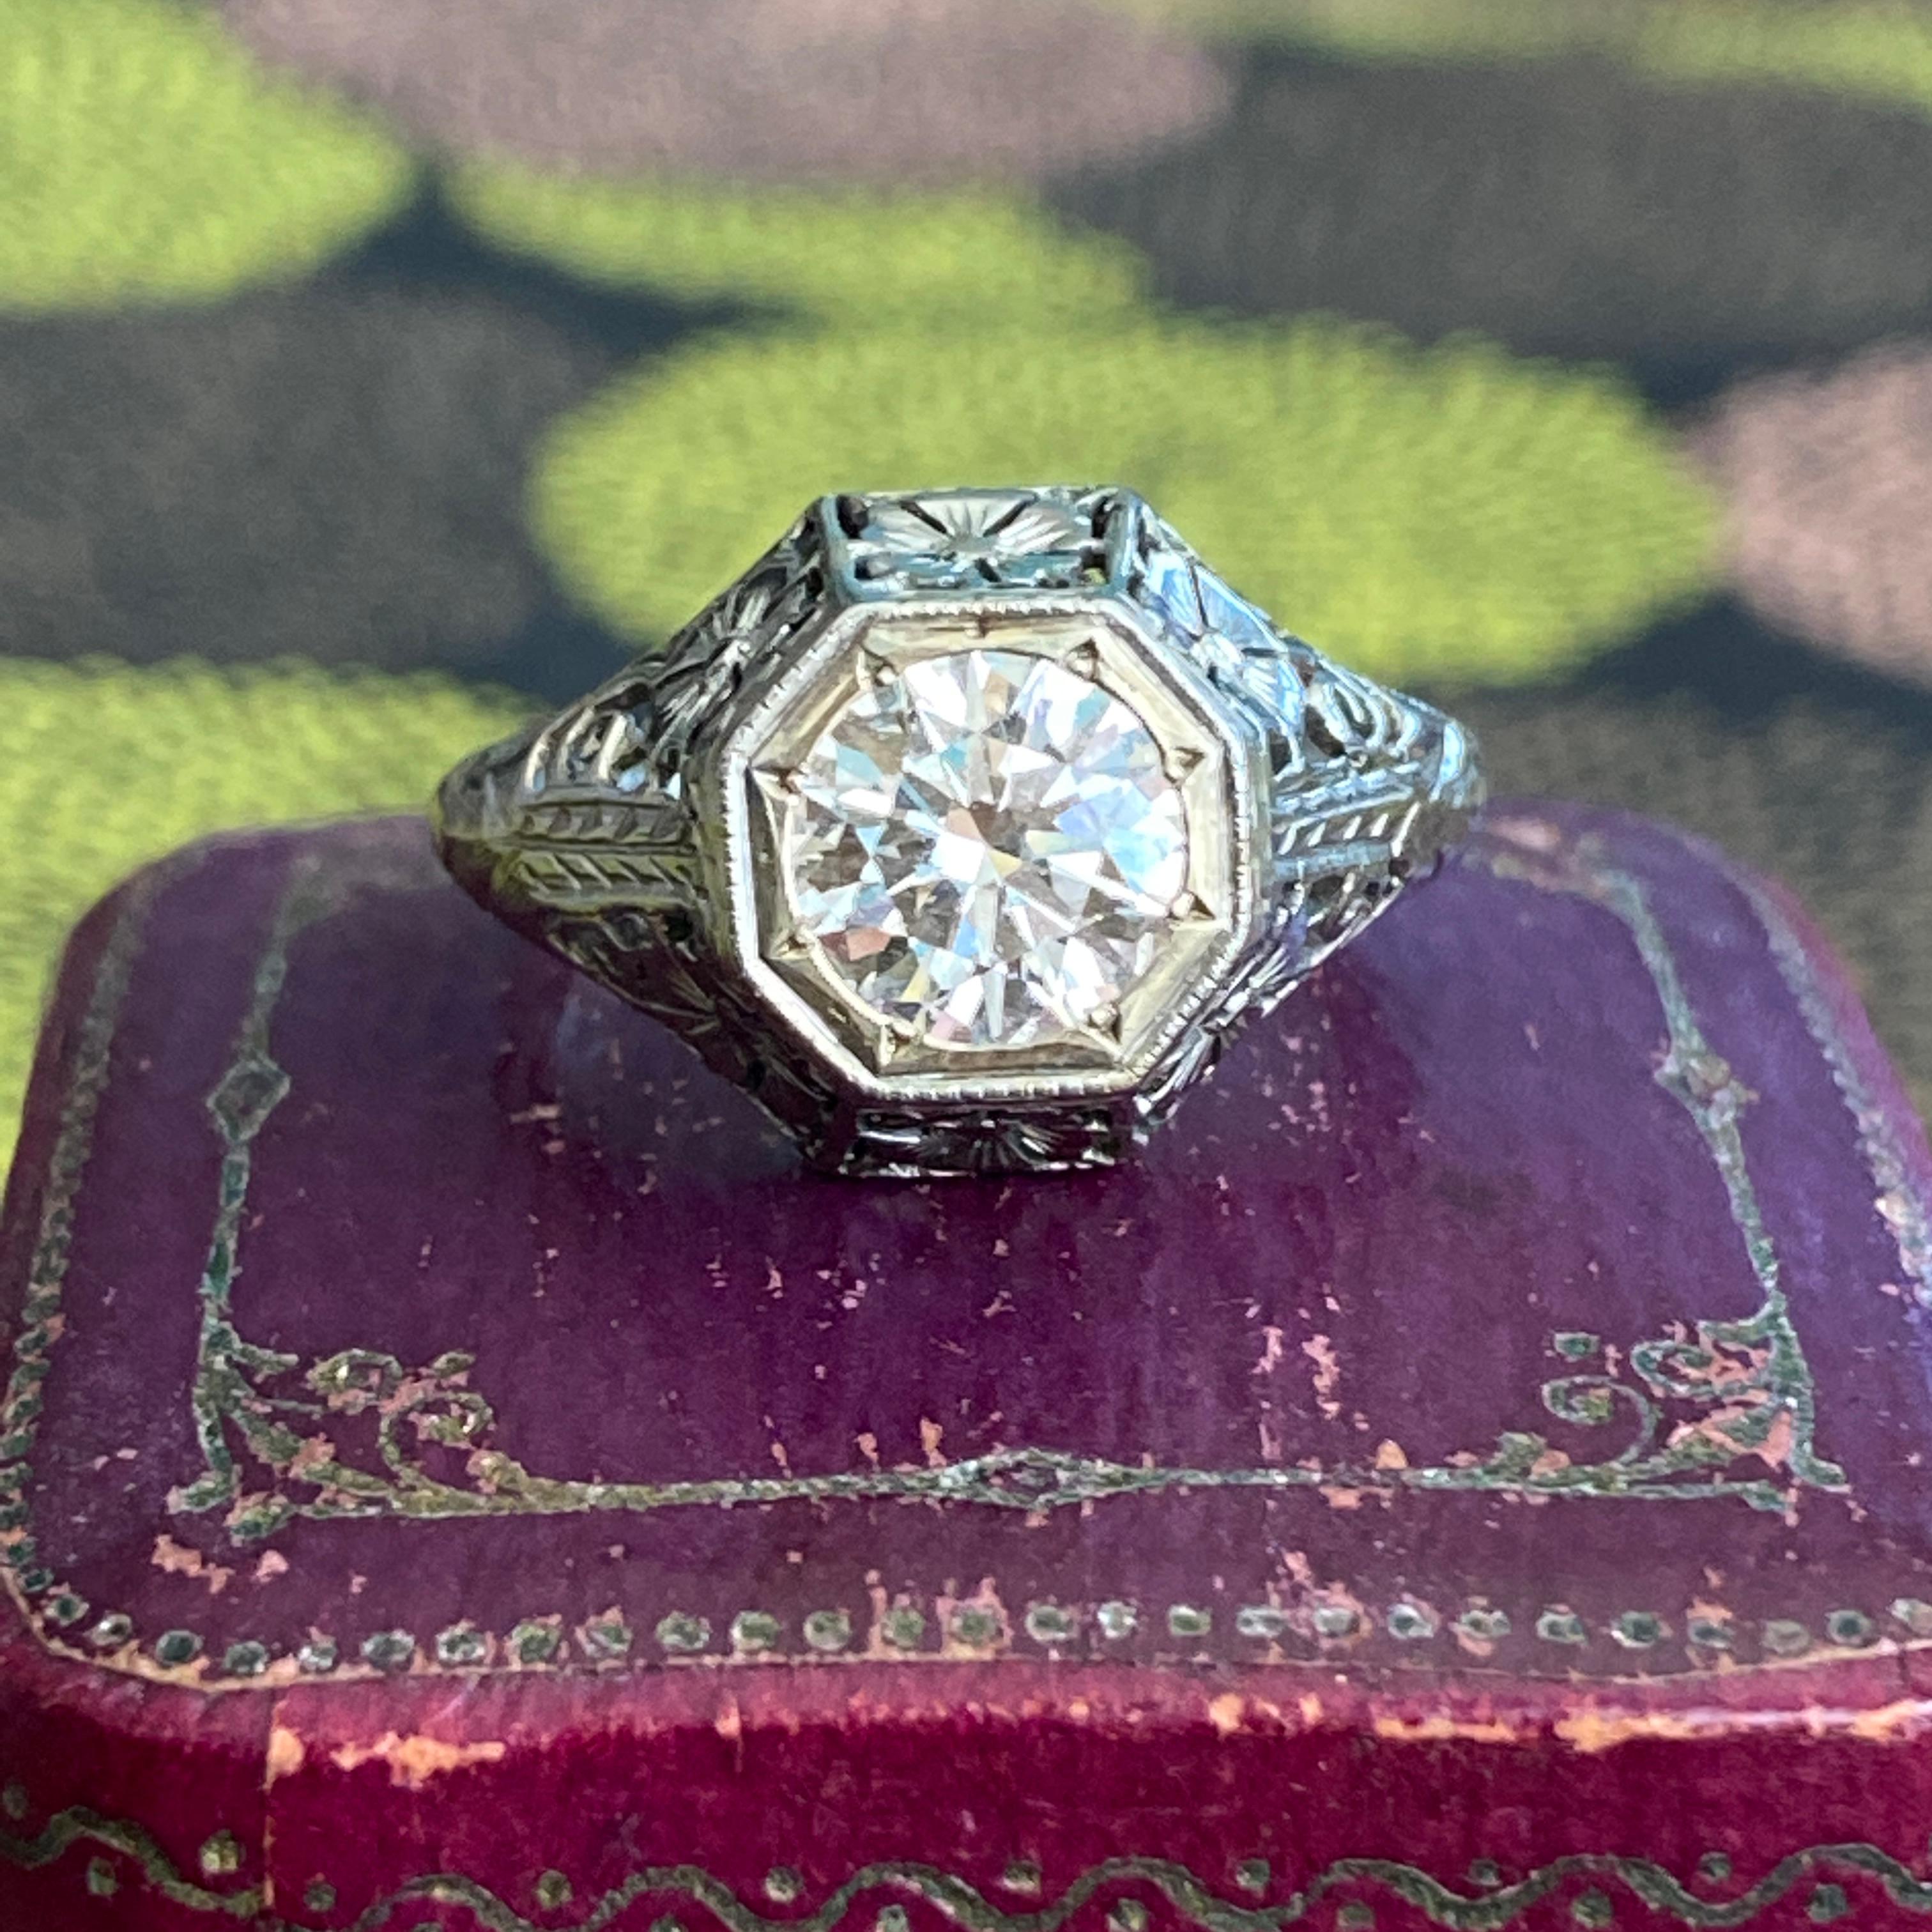 Details:
Stunning Art Deco 1.18ct diamond ring, with sweet floral pansy filigree in 18K white gold. This ring is from the 1920's, and is in very good condition. The shoulders of the ring have pansy flowers, and delicate filigree scroll work, as well